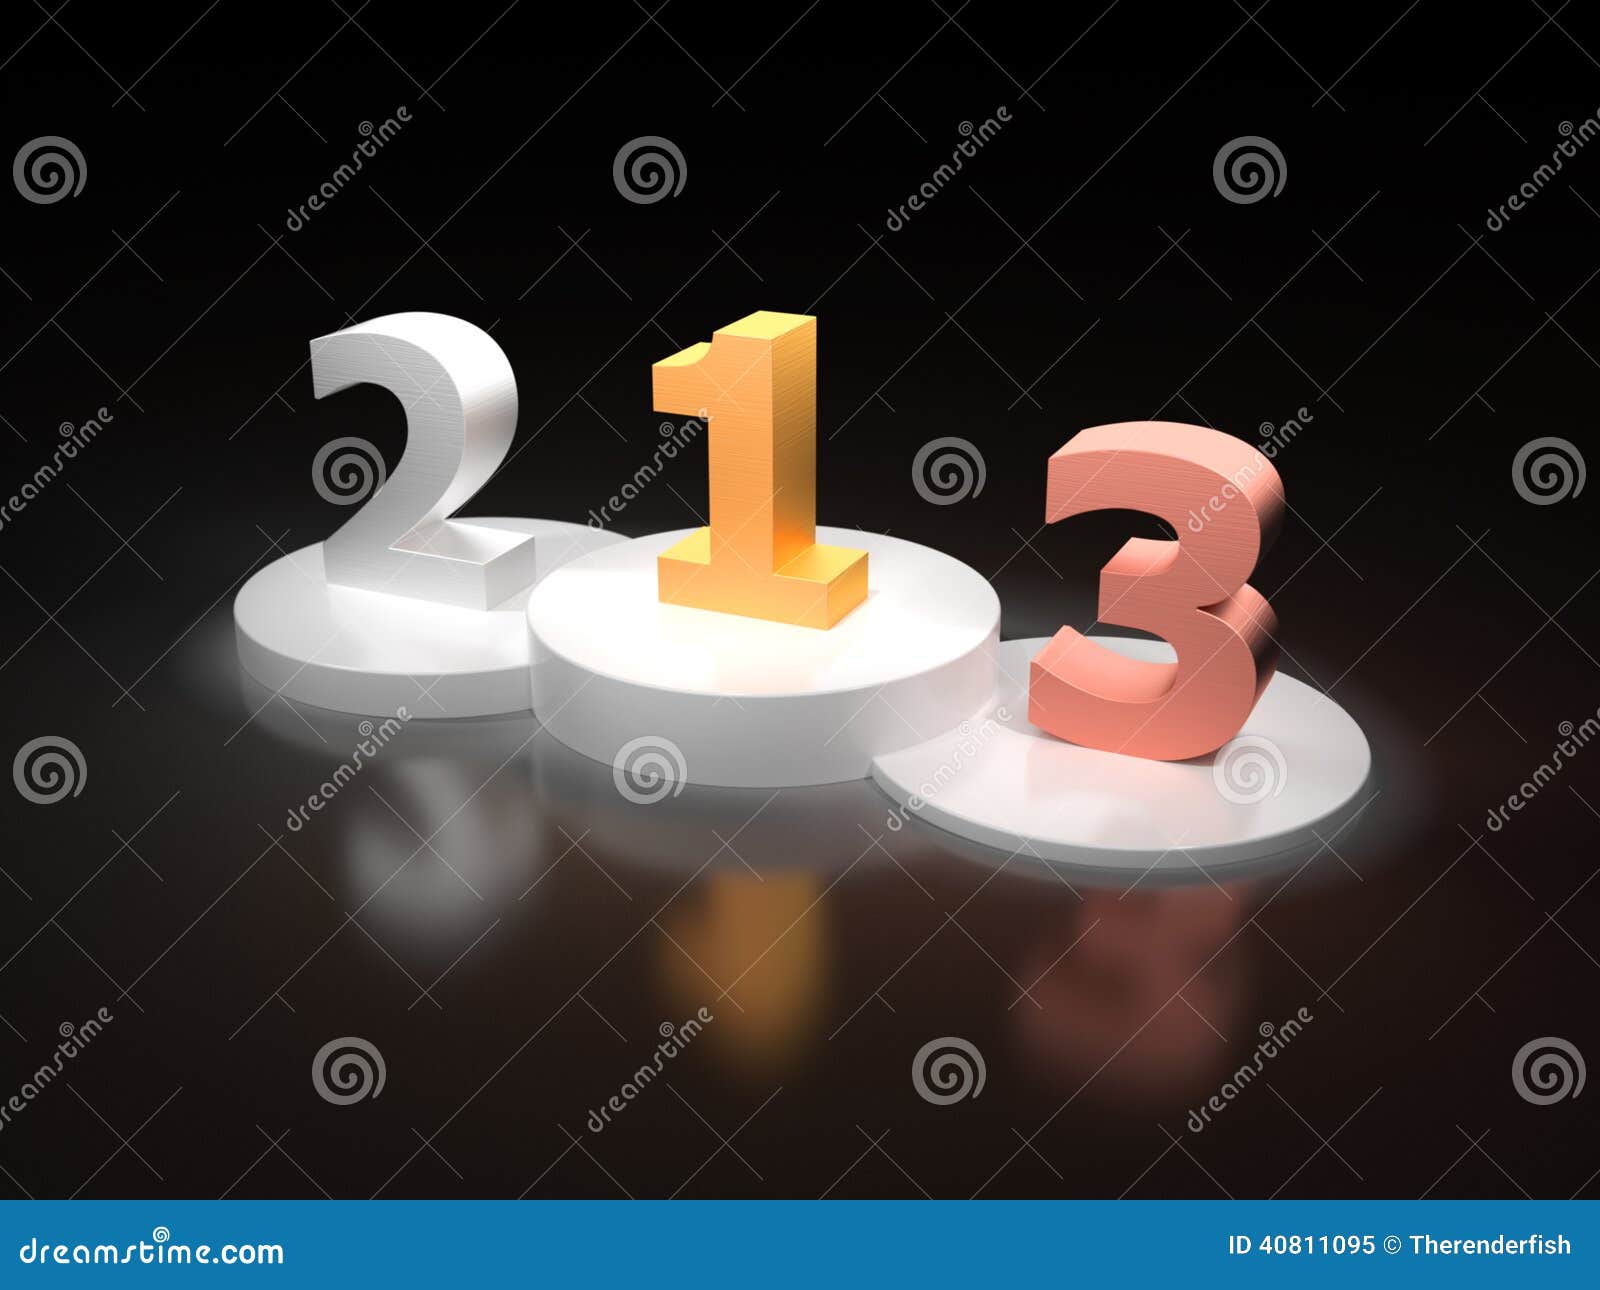 Victory Podium - Numbers 1, 2, 3 Royalty-Free Stock Image ...